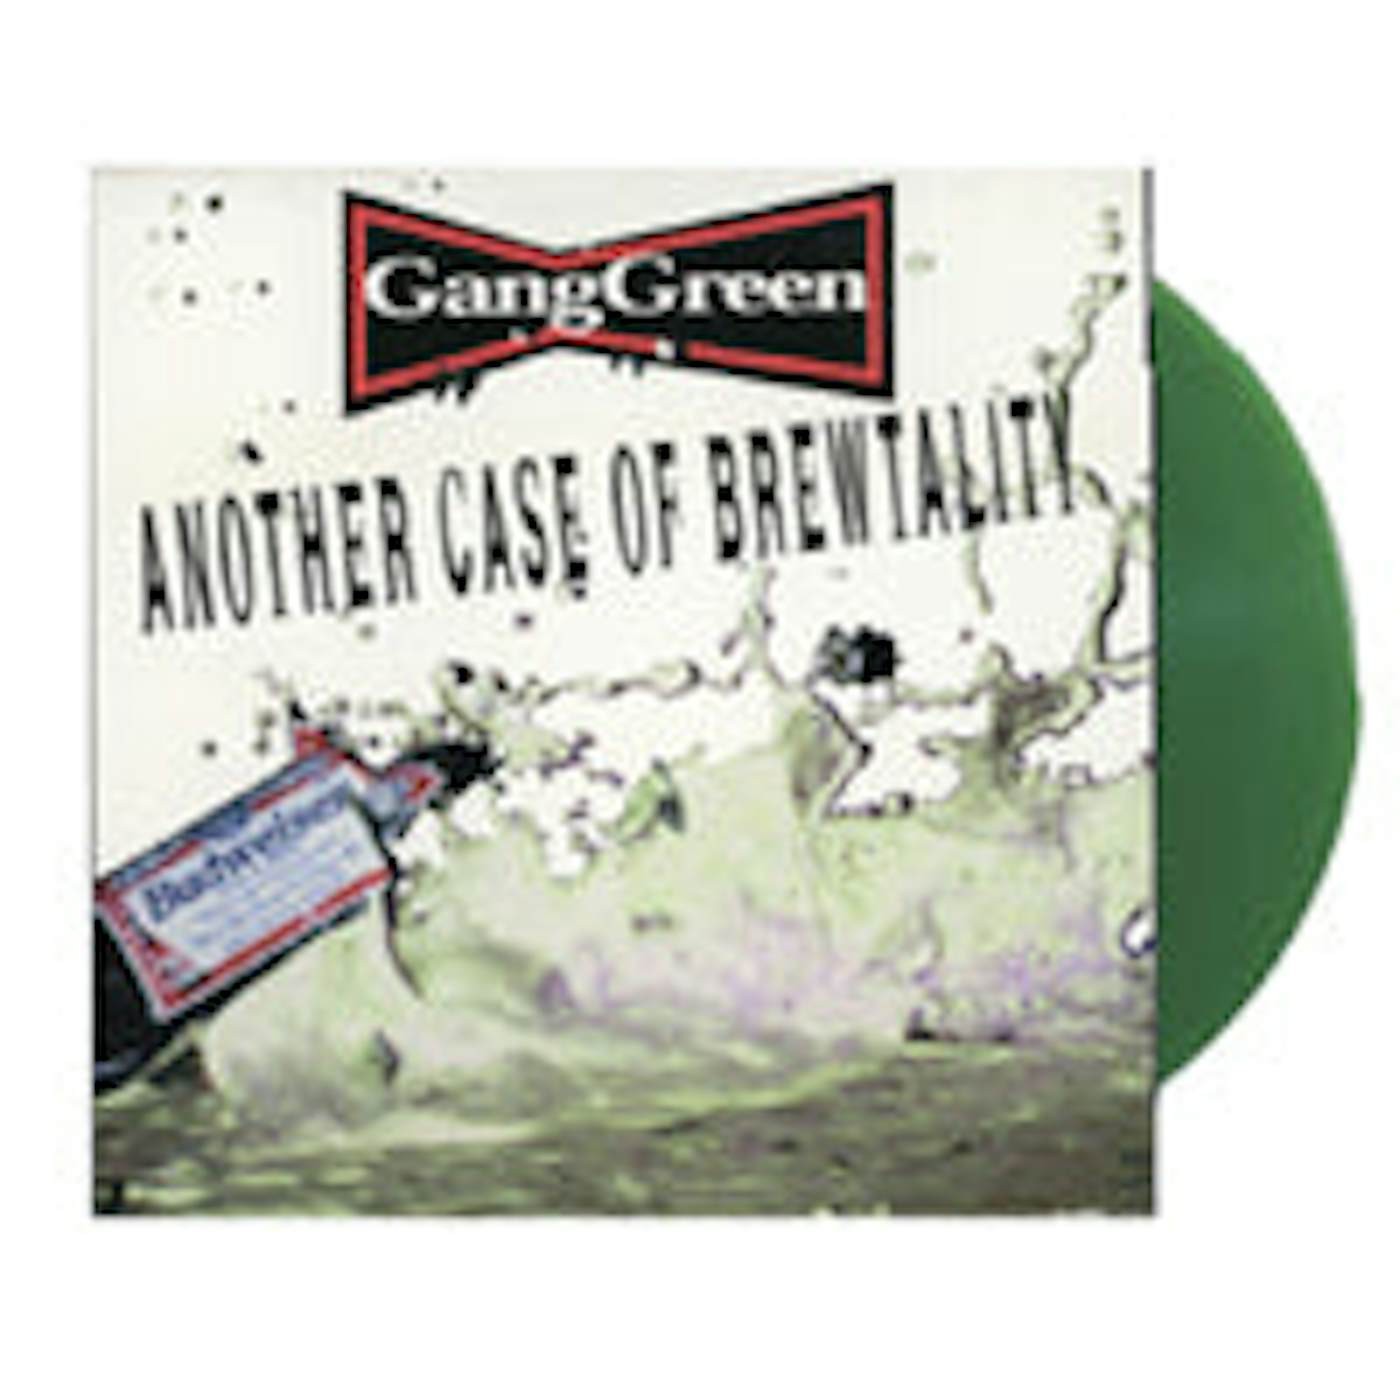 Gang Green LP - Another Case Of Brewtality (Vinyl)